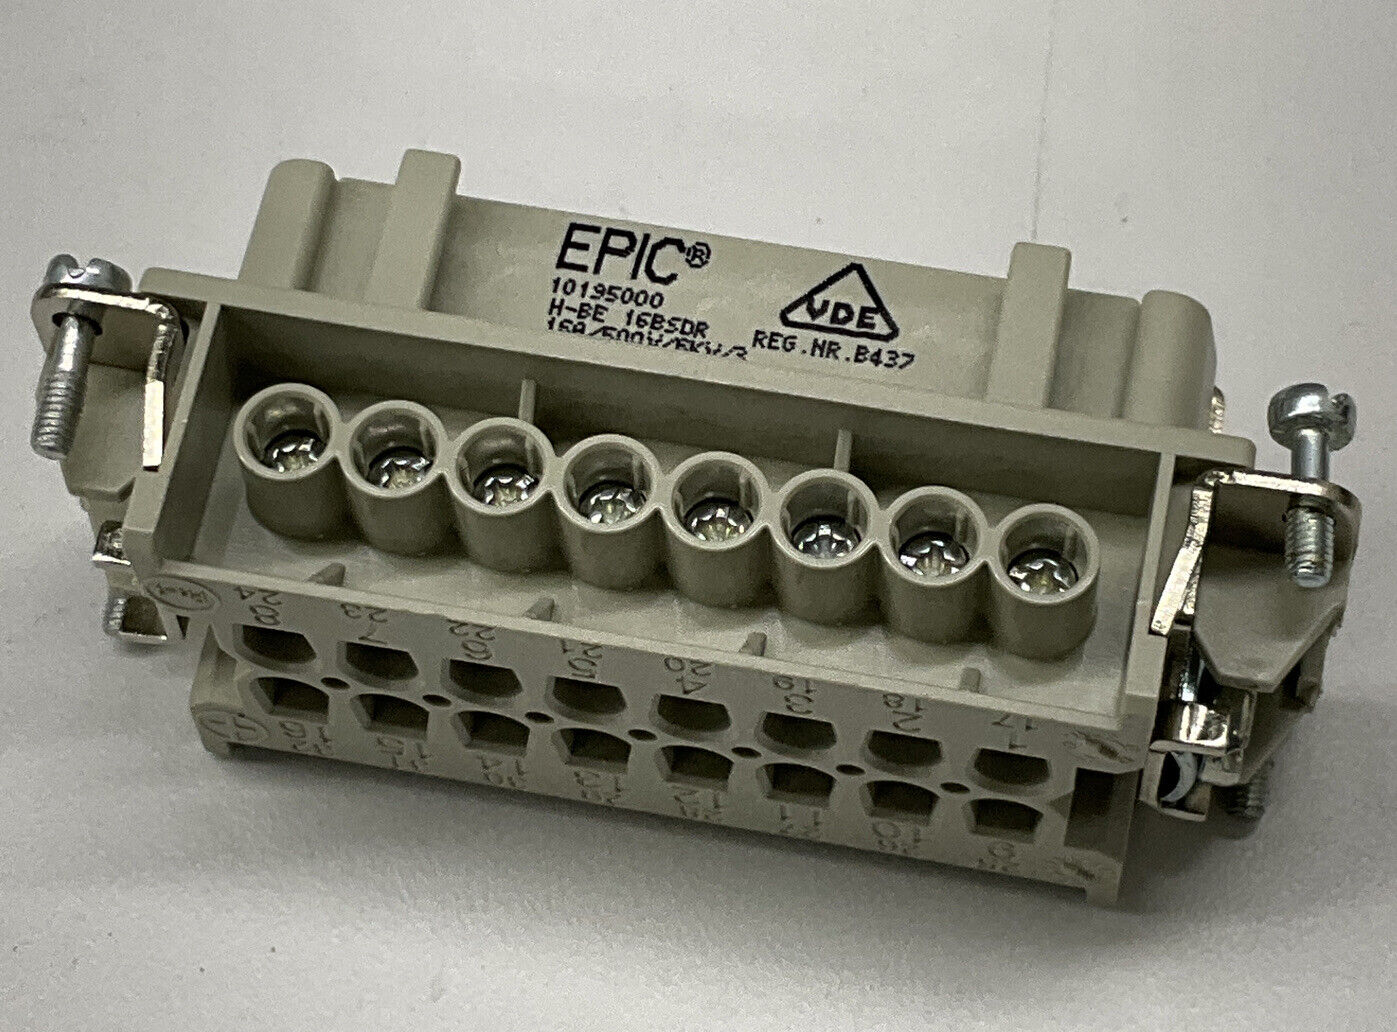 Epic 10.195000  H-BE 16-BS-DR New 16-Pin Female Receptacle Insert (SH109)